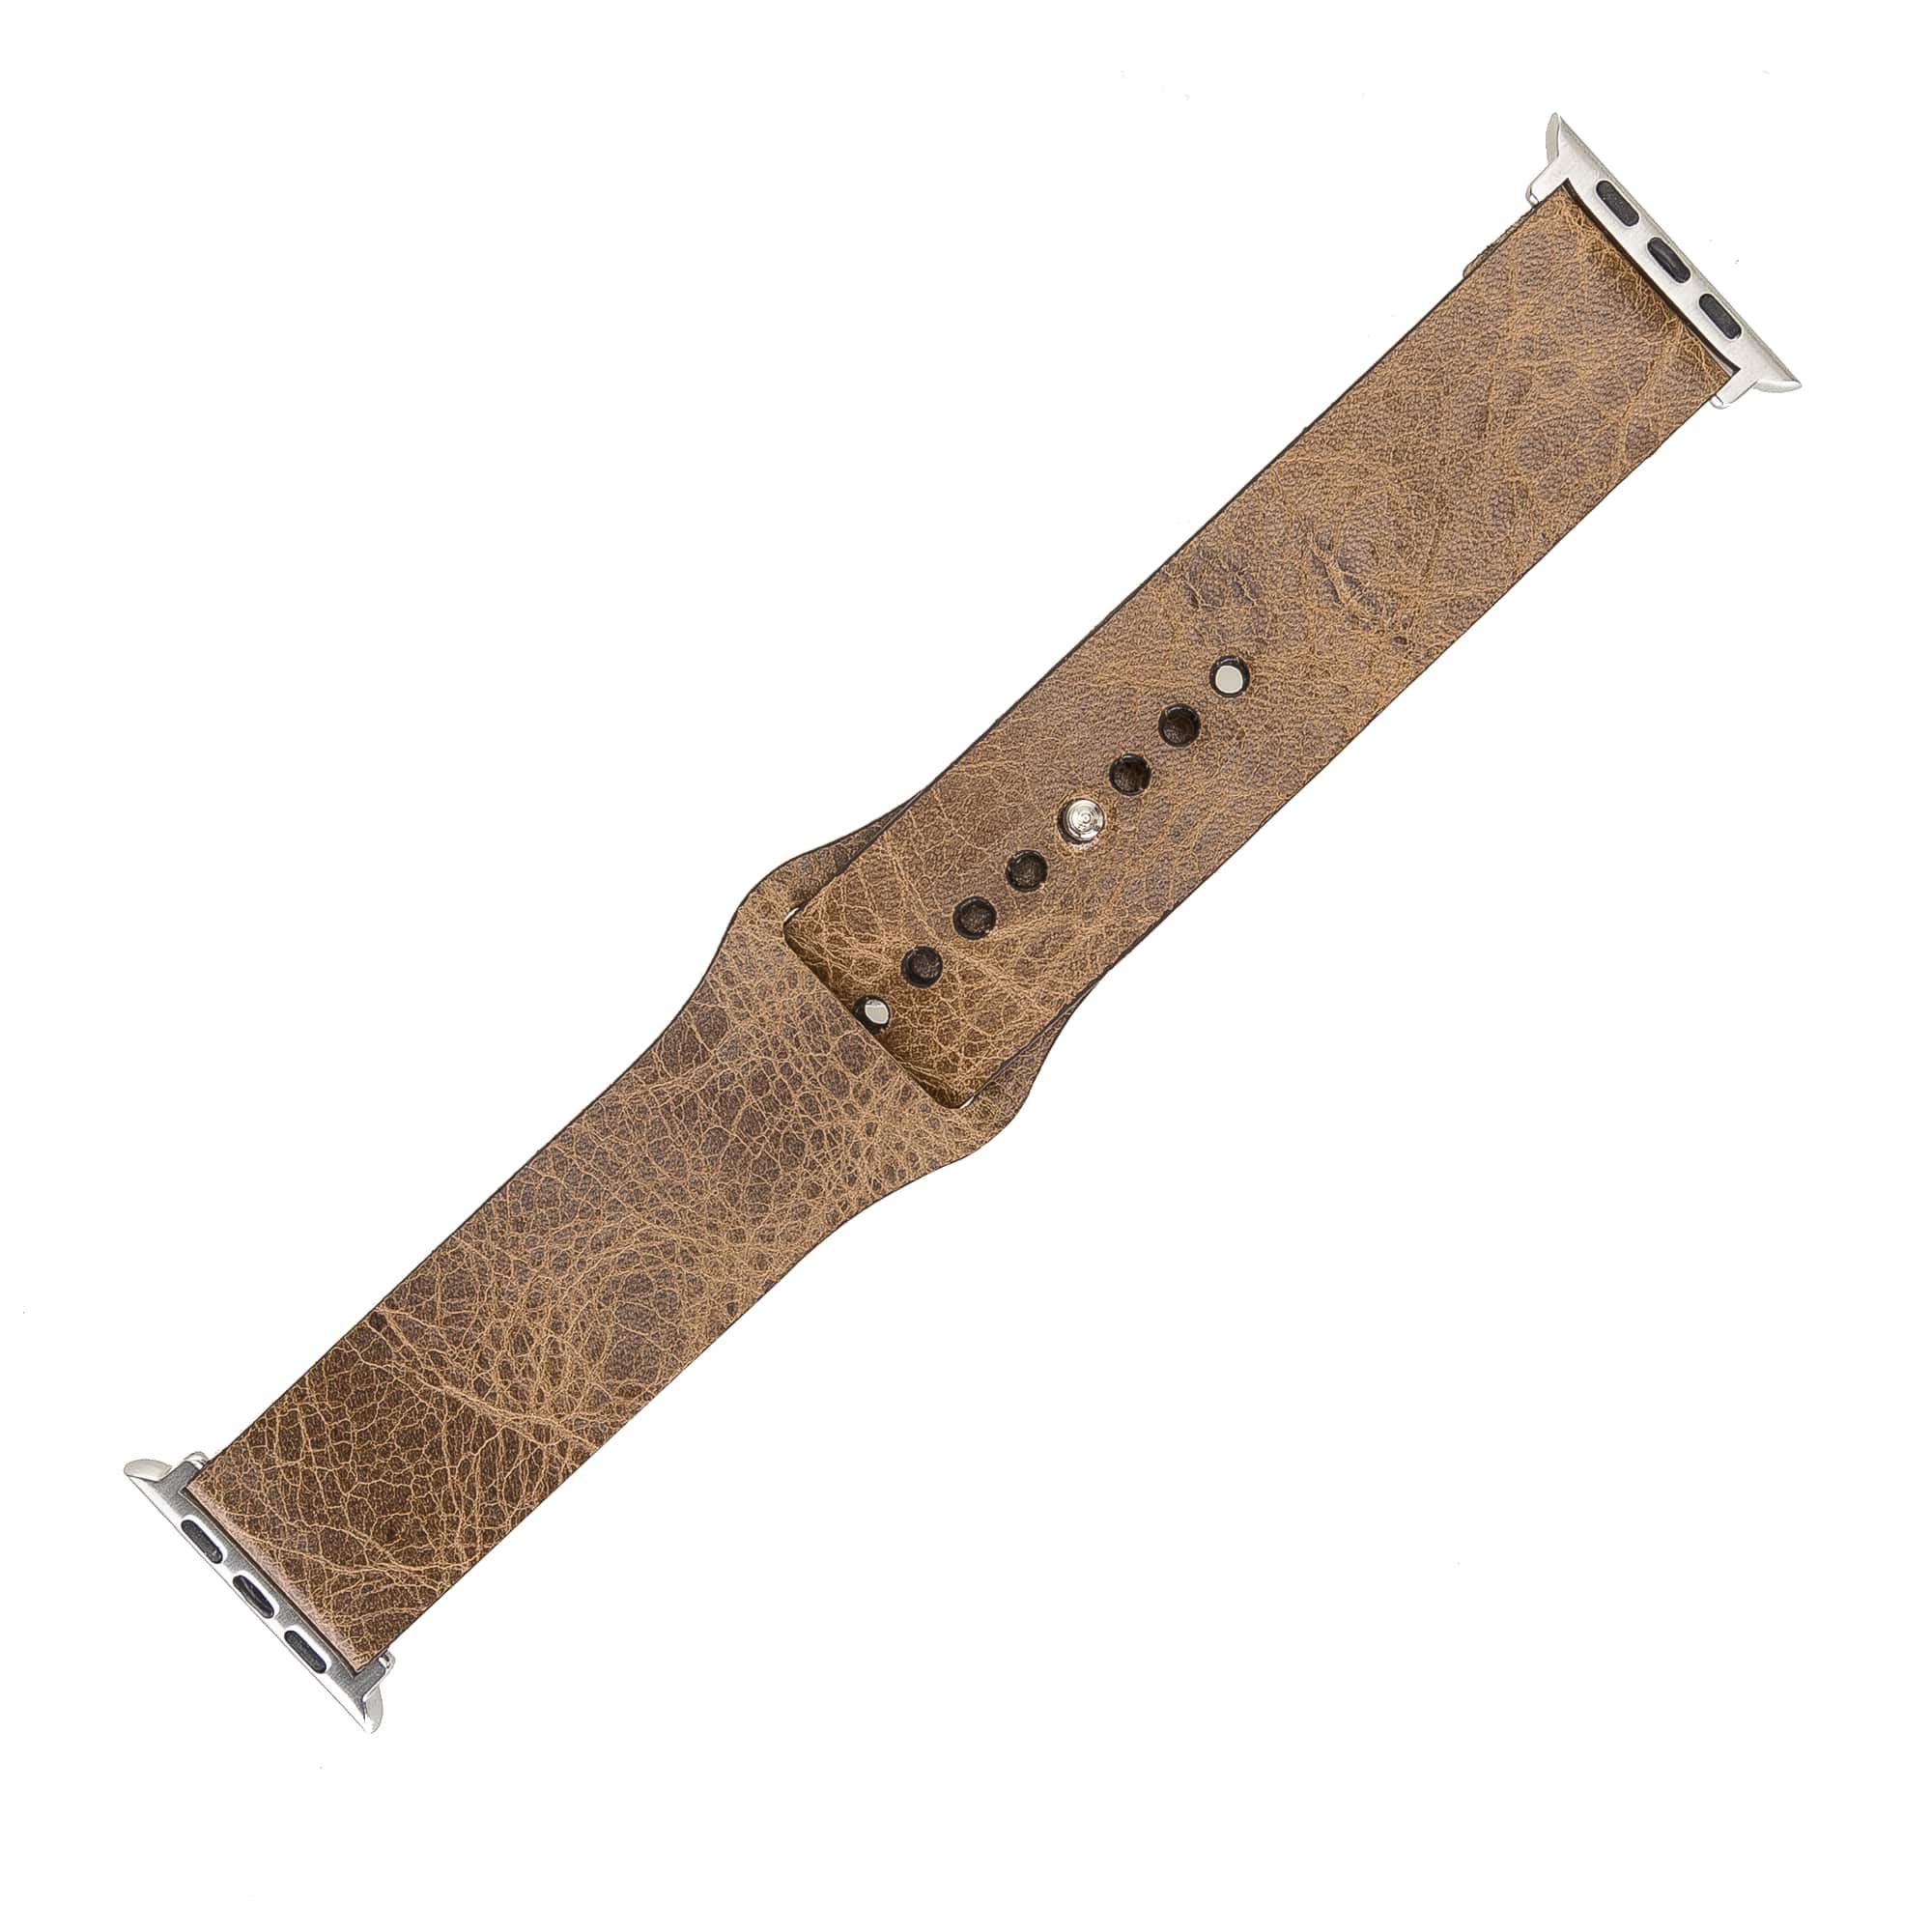  Sutton Classic Brown Genuine Leather Apple Watch Band Strap 38mm 40mm 42mm 44mm 45mm for All Series - Bomonti - 4